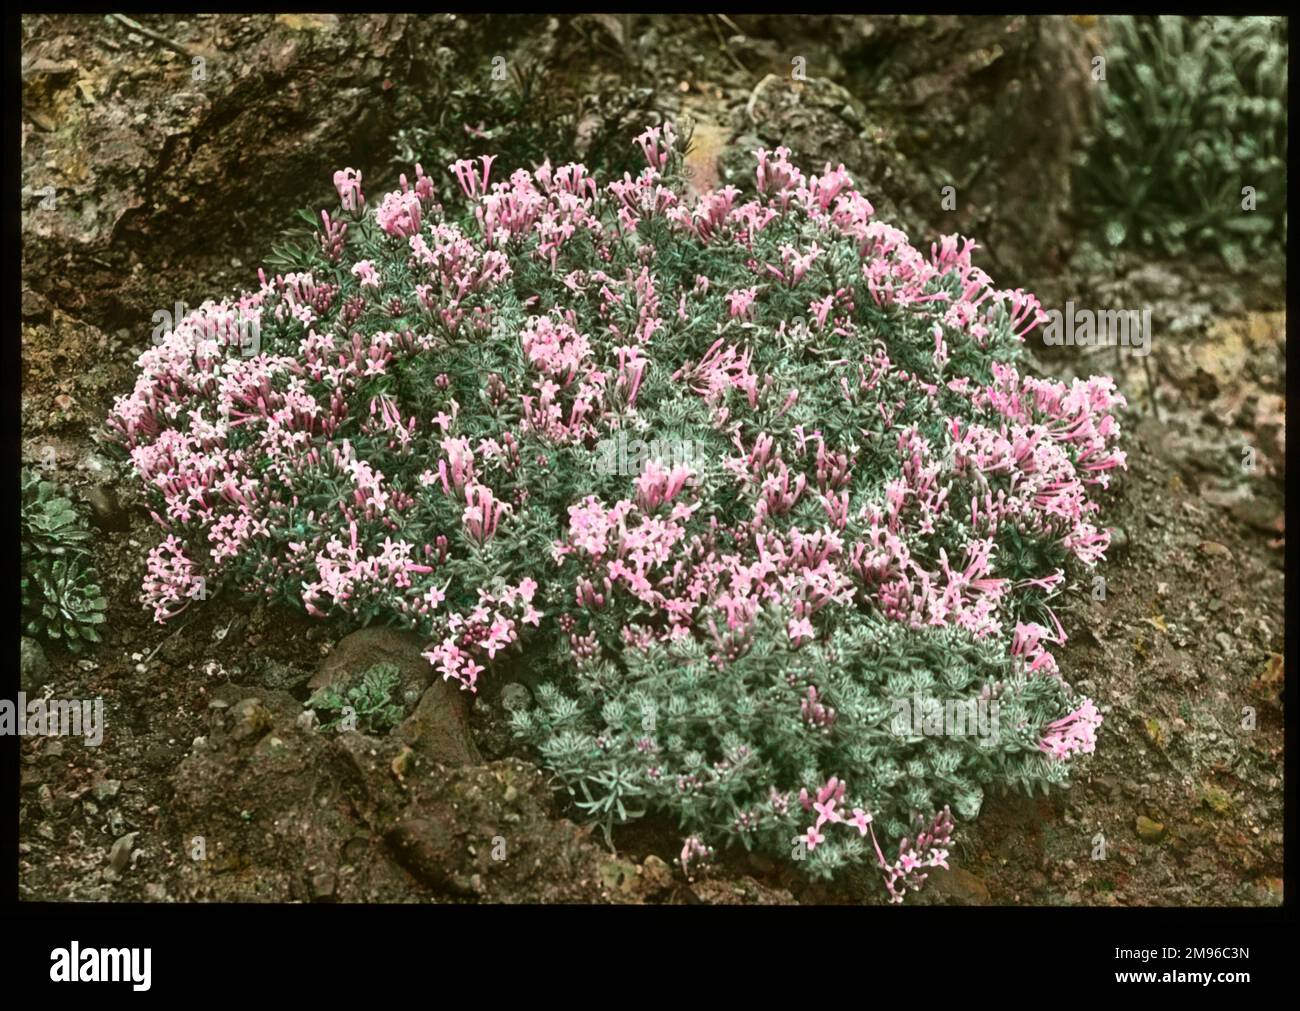 Asperula Suberosa (Woodruff), a perennial of the Rubiaceae family.  Seen here growing in a rocky setting, with pink flowers. Stock Photo